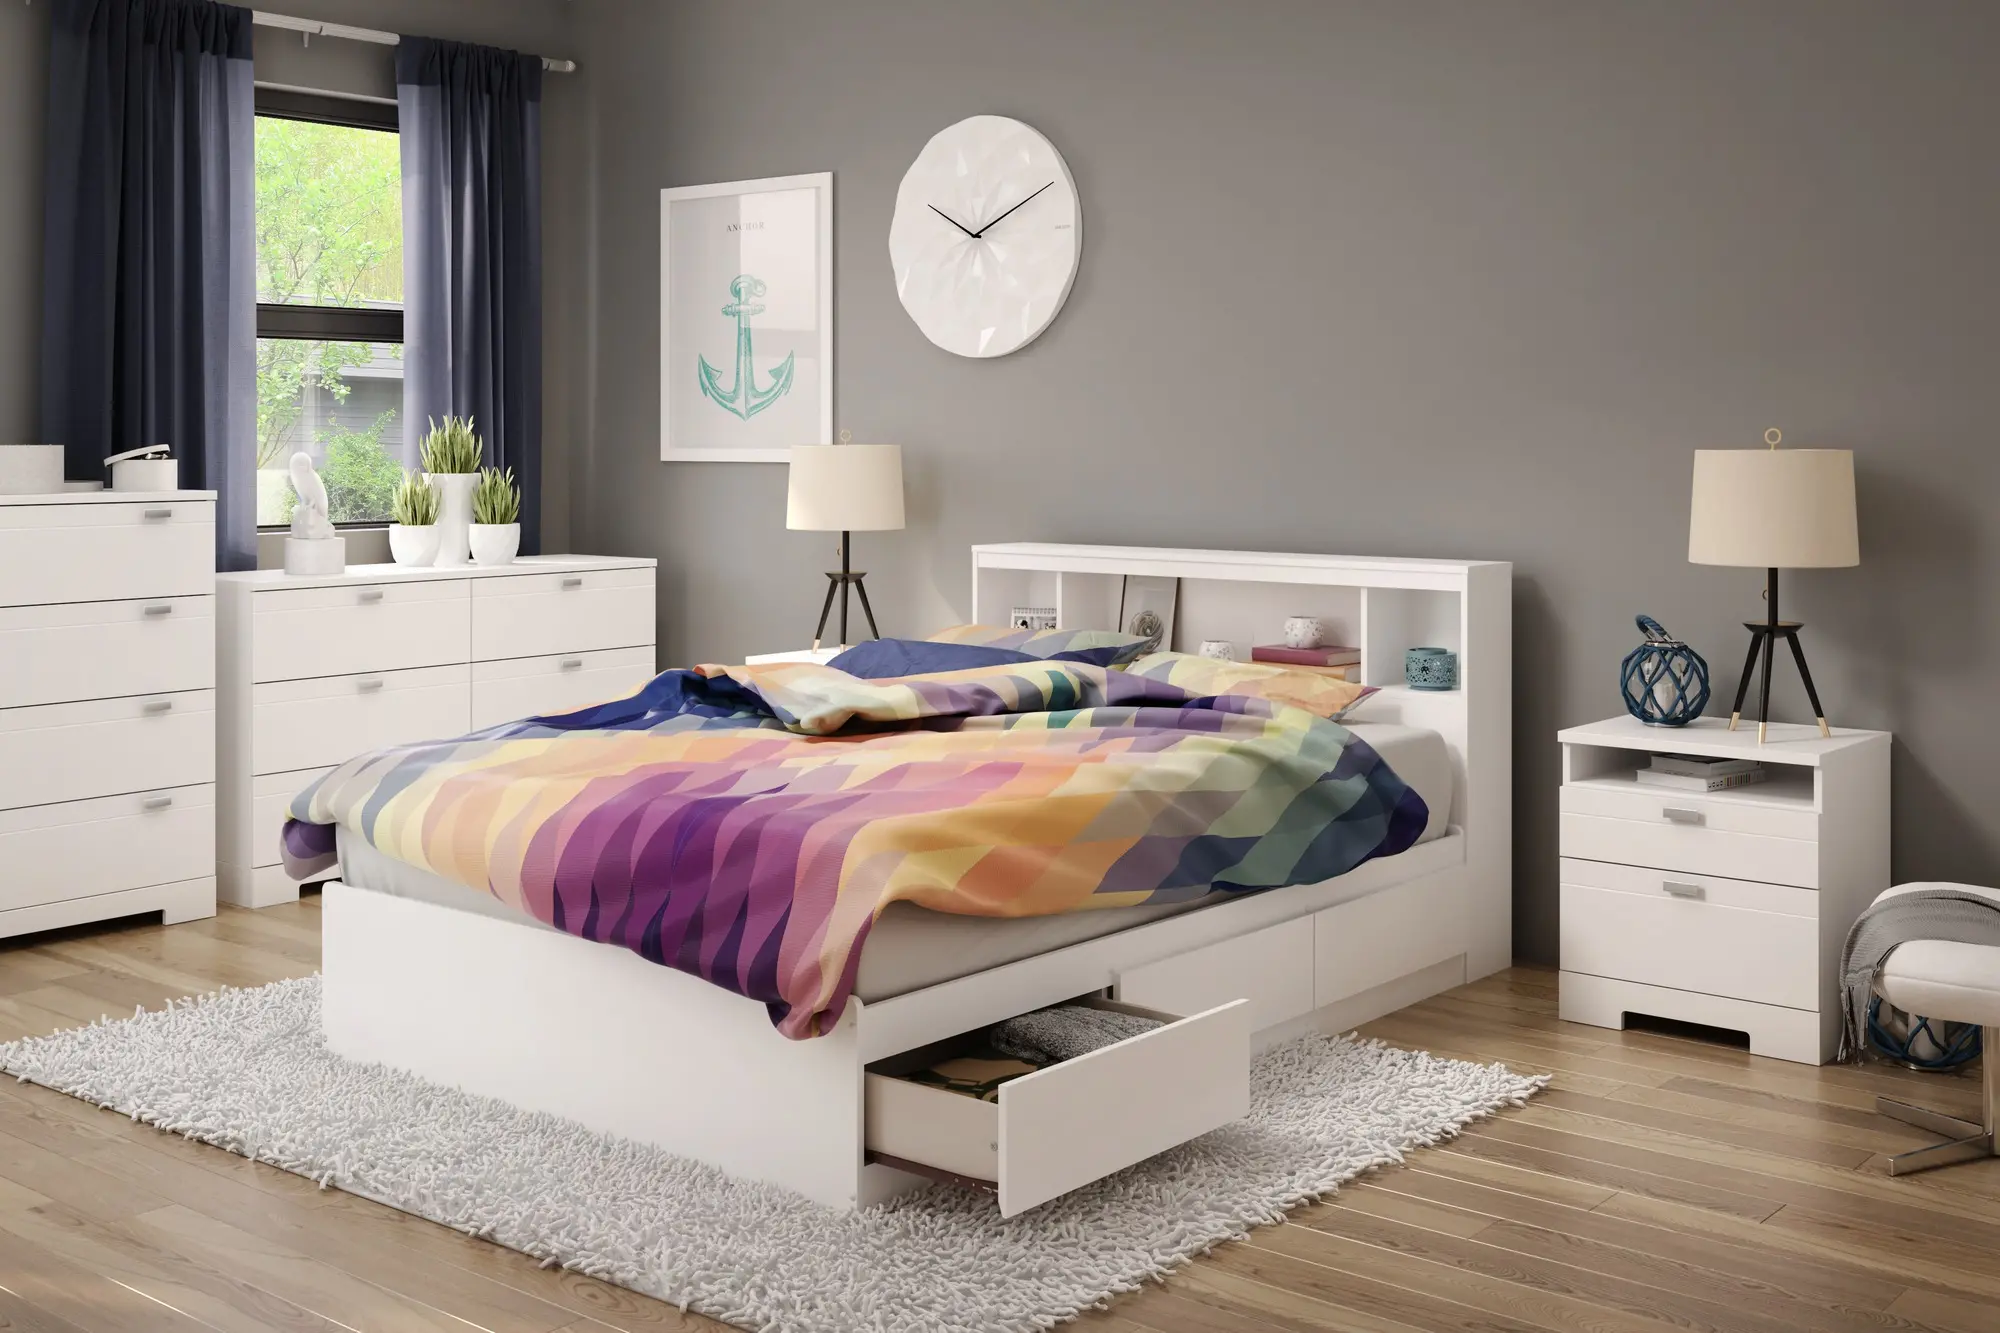 Reevo Full Mates Bed With Bookcase Headboard - South Shore